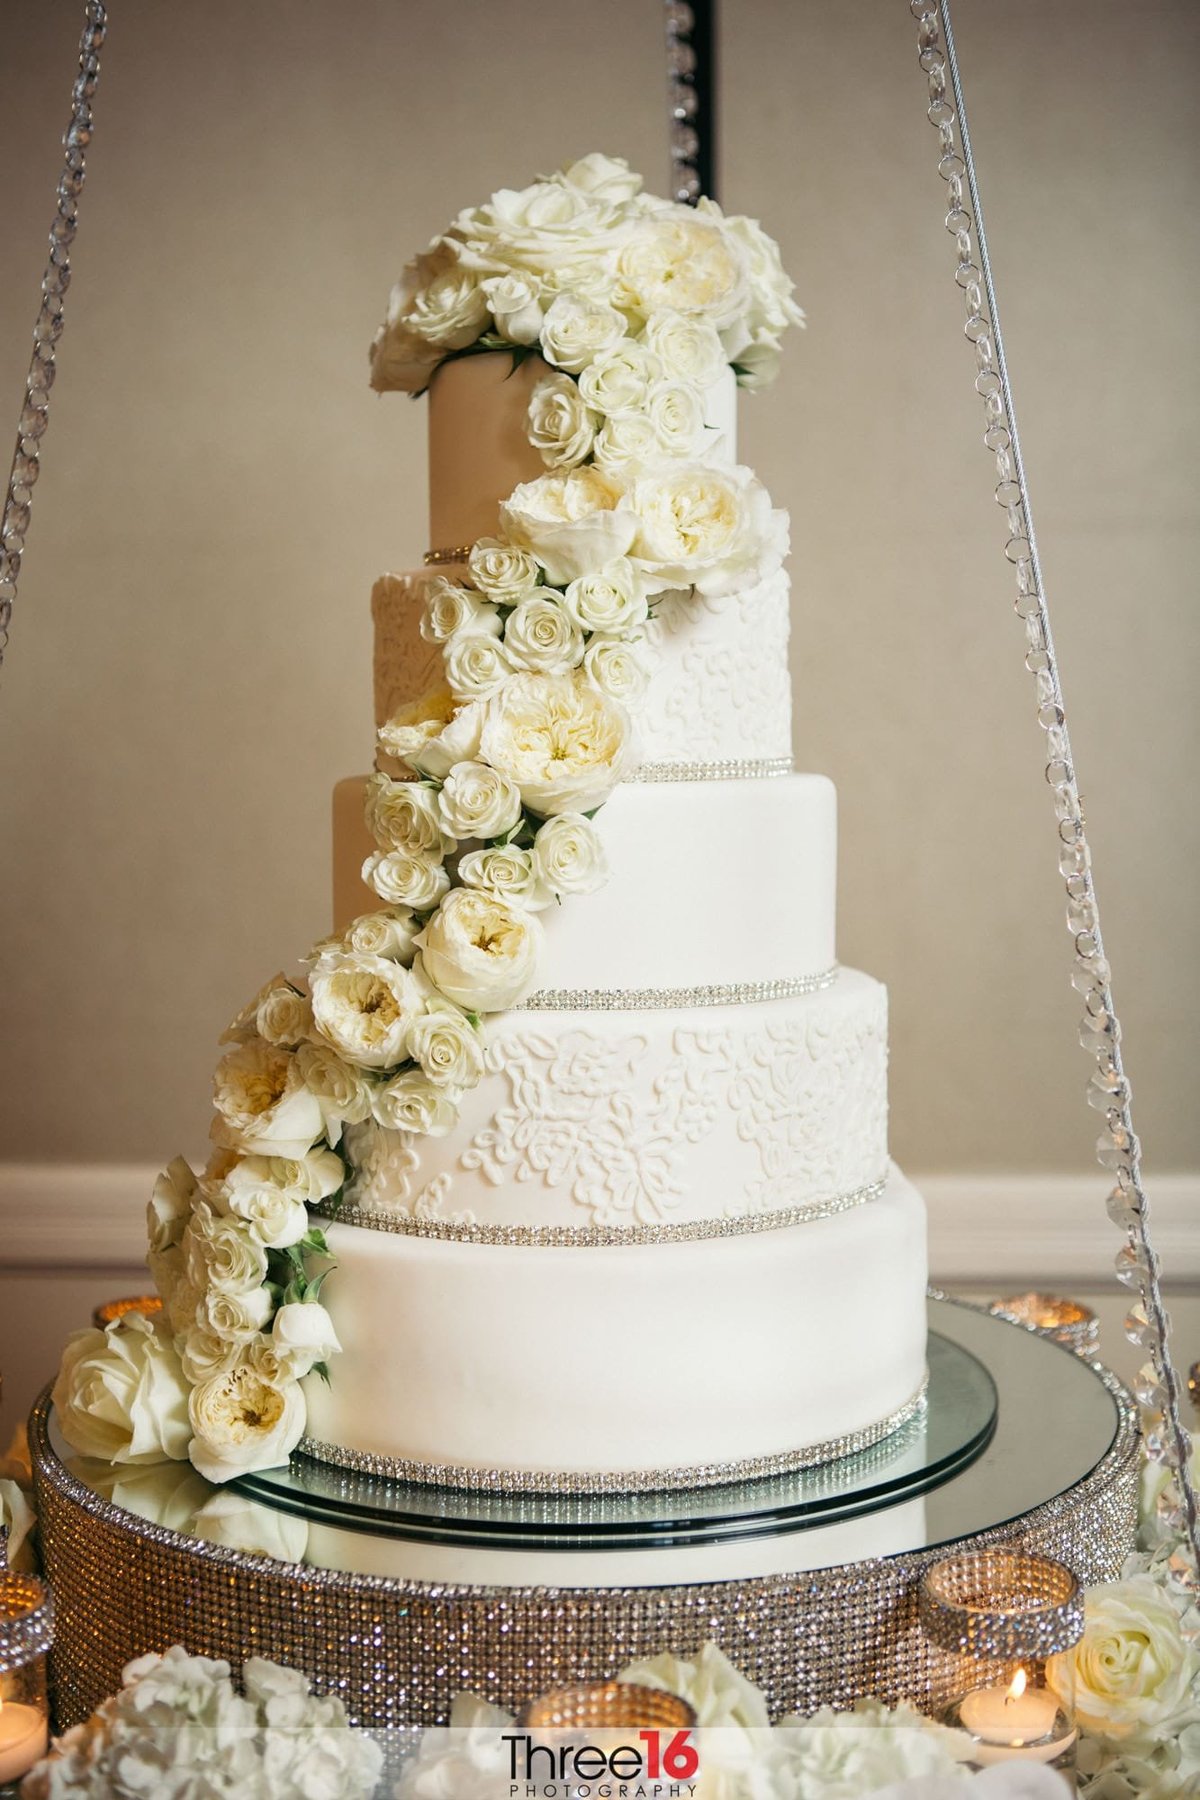 White 5-tiered wedding cake with flowers draped along the side